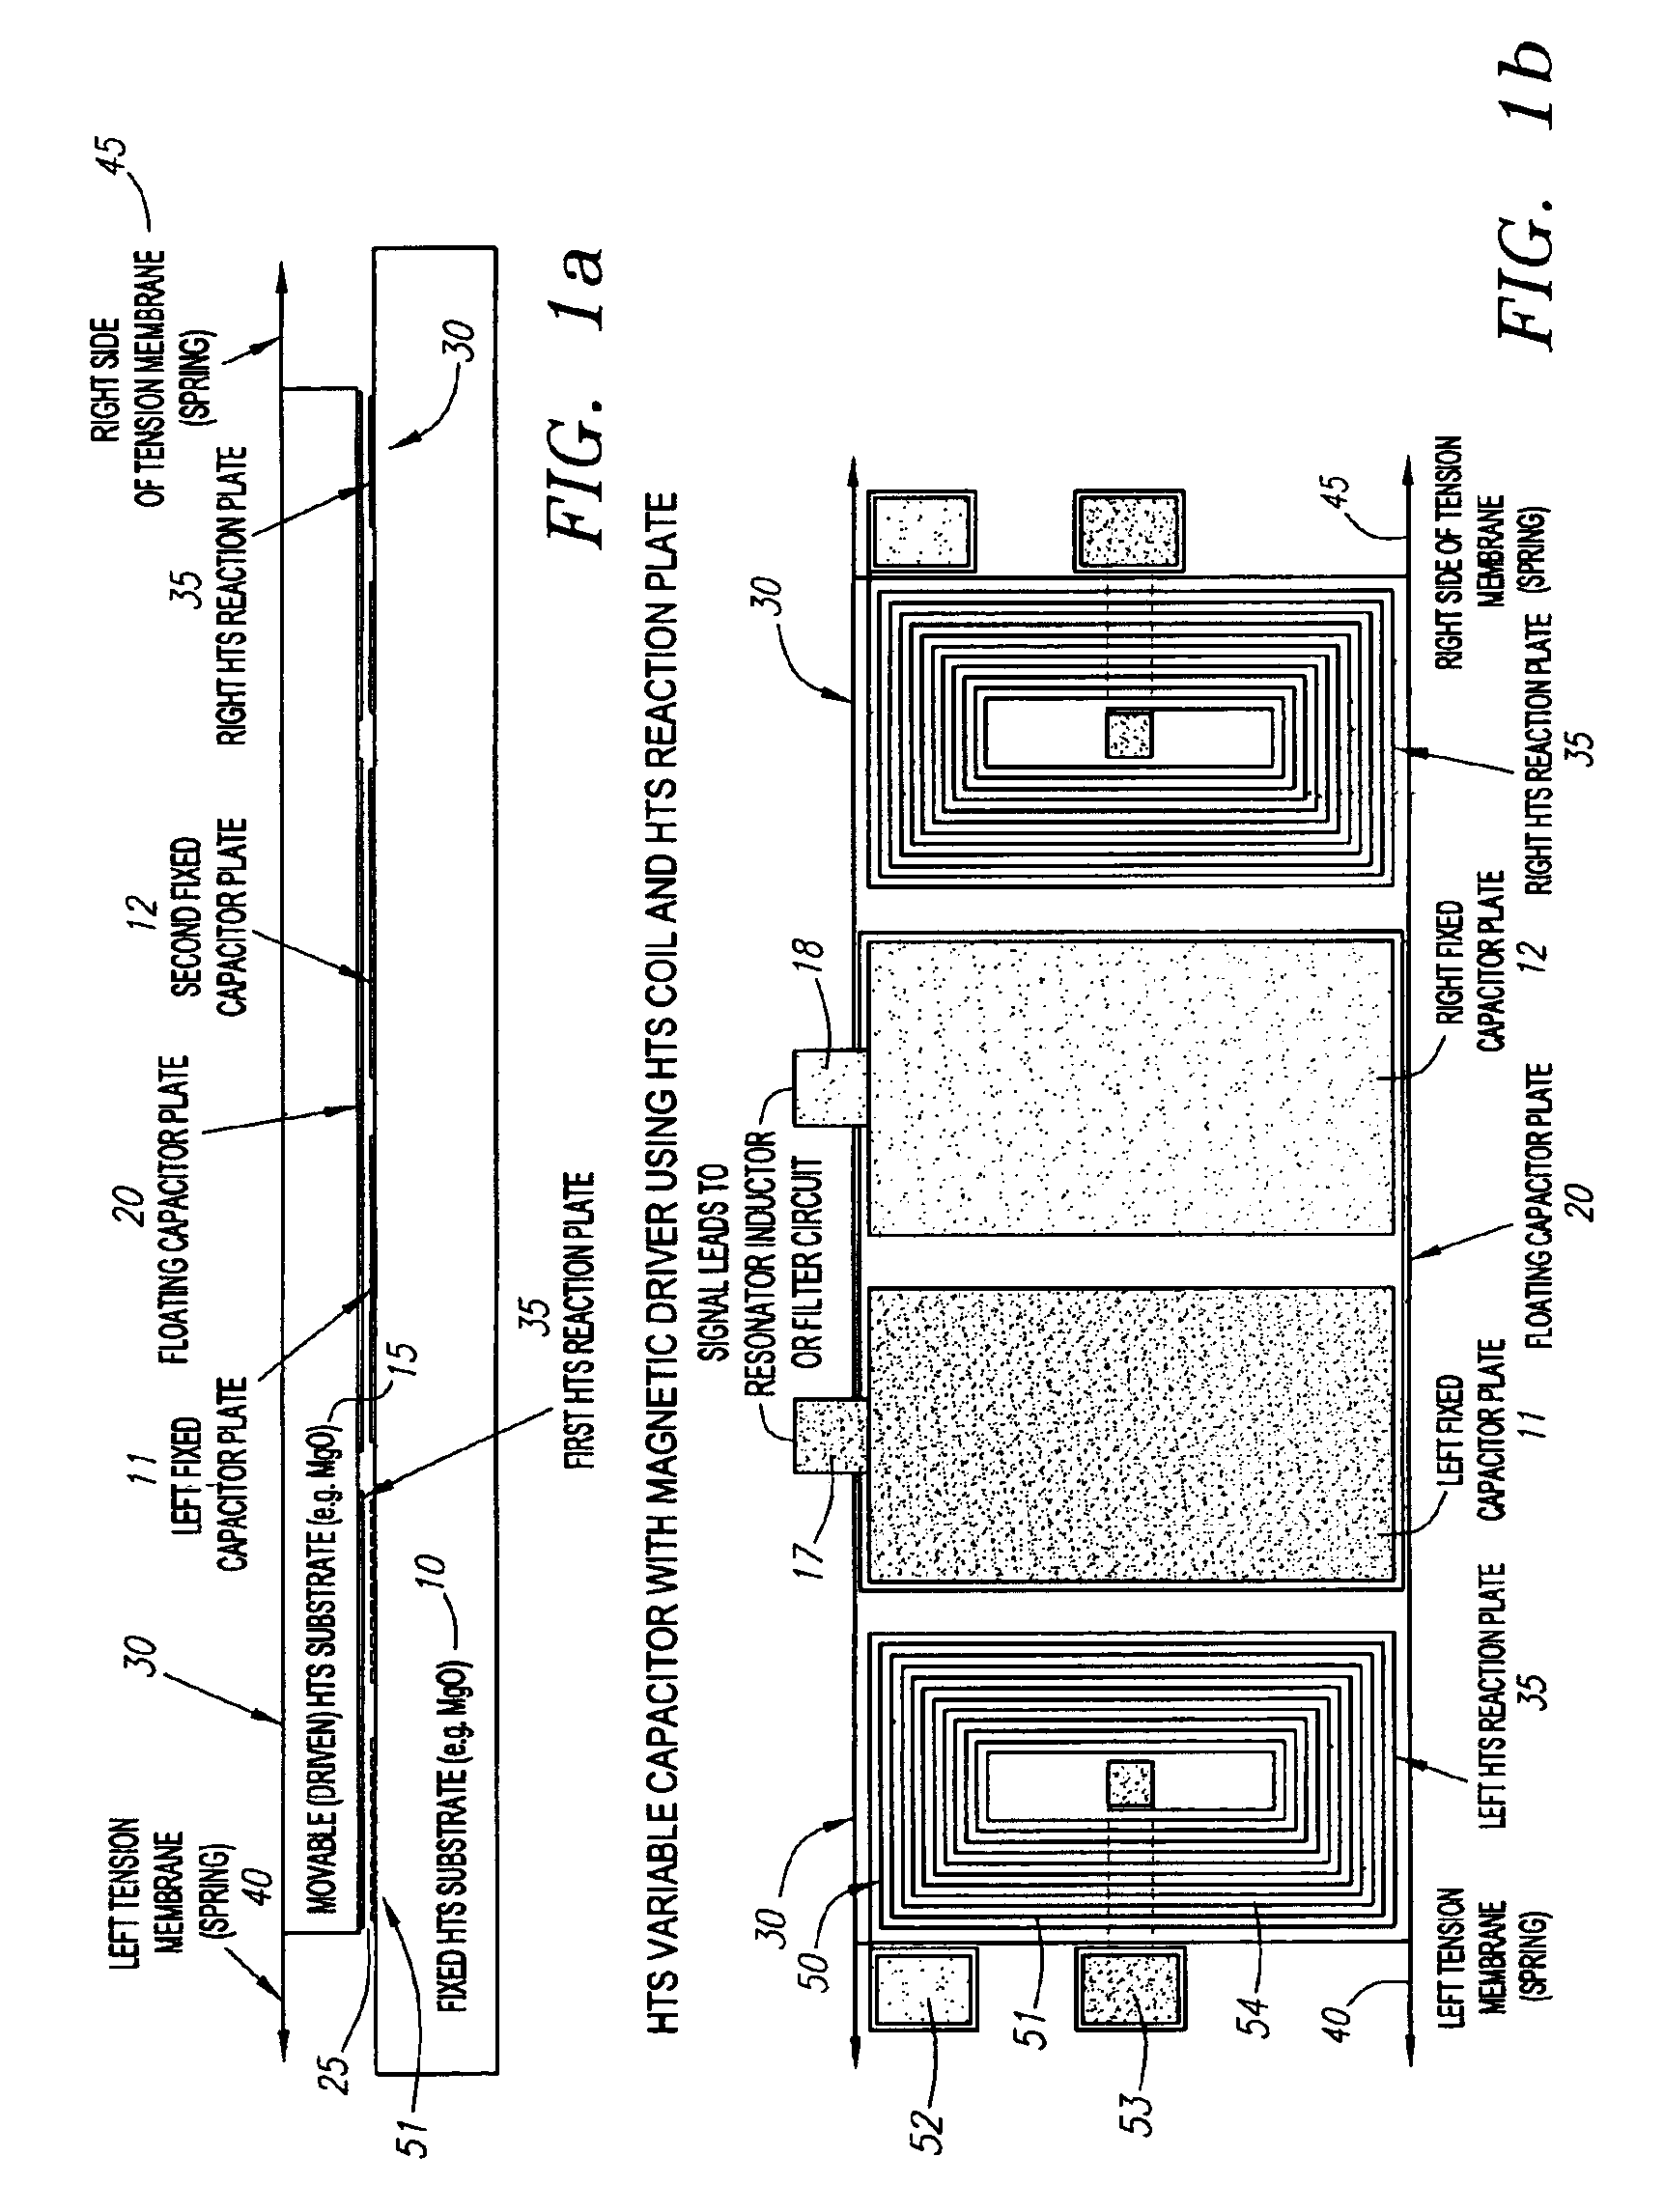 High temperature superconductor tunable filter having a movable substrate controlled by a magnetic actuator